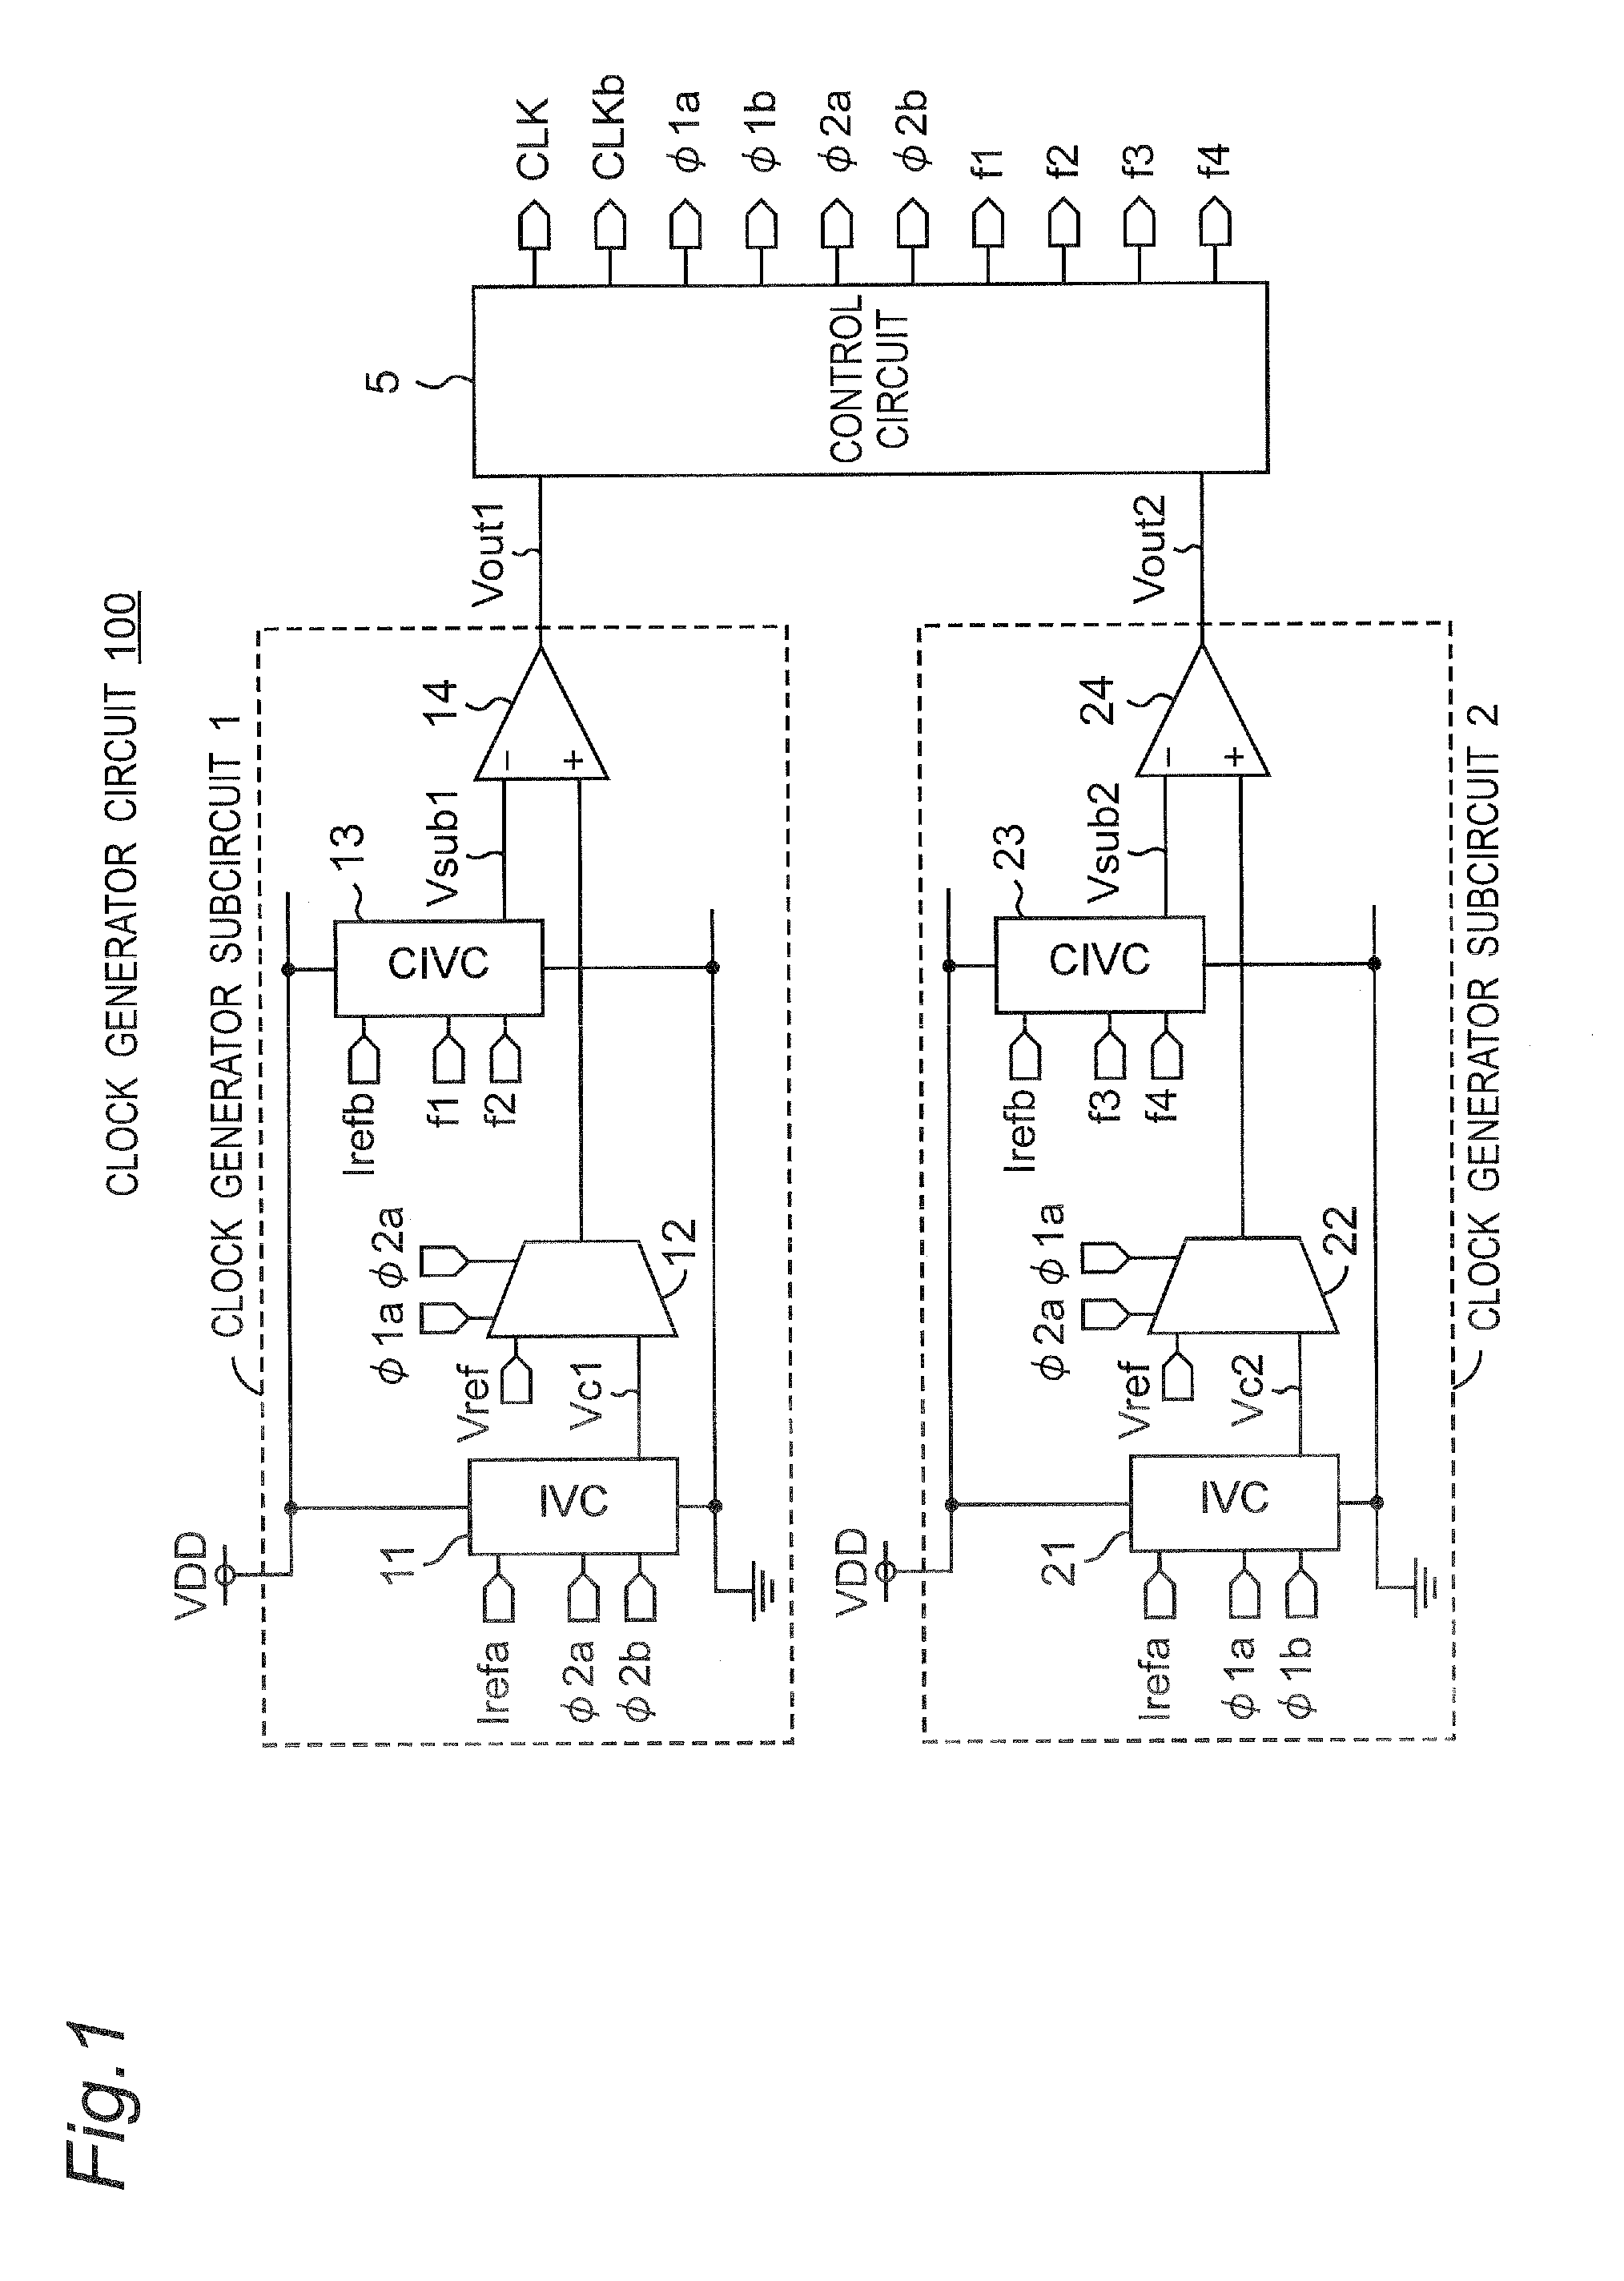 Relaxation oscillator circuit including two clock generator subcircuits having same configuration operating alternately